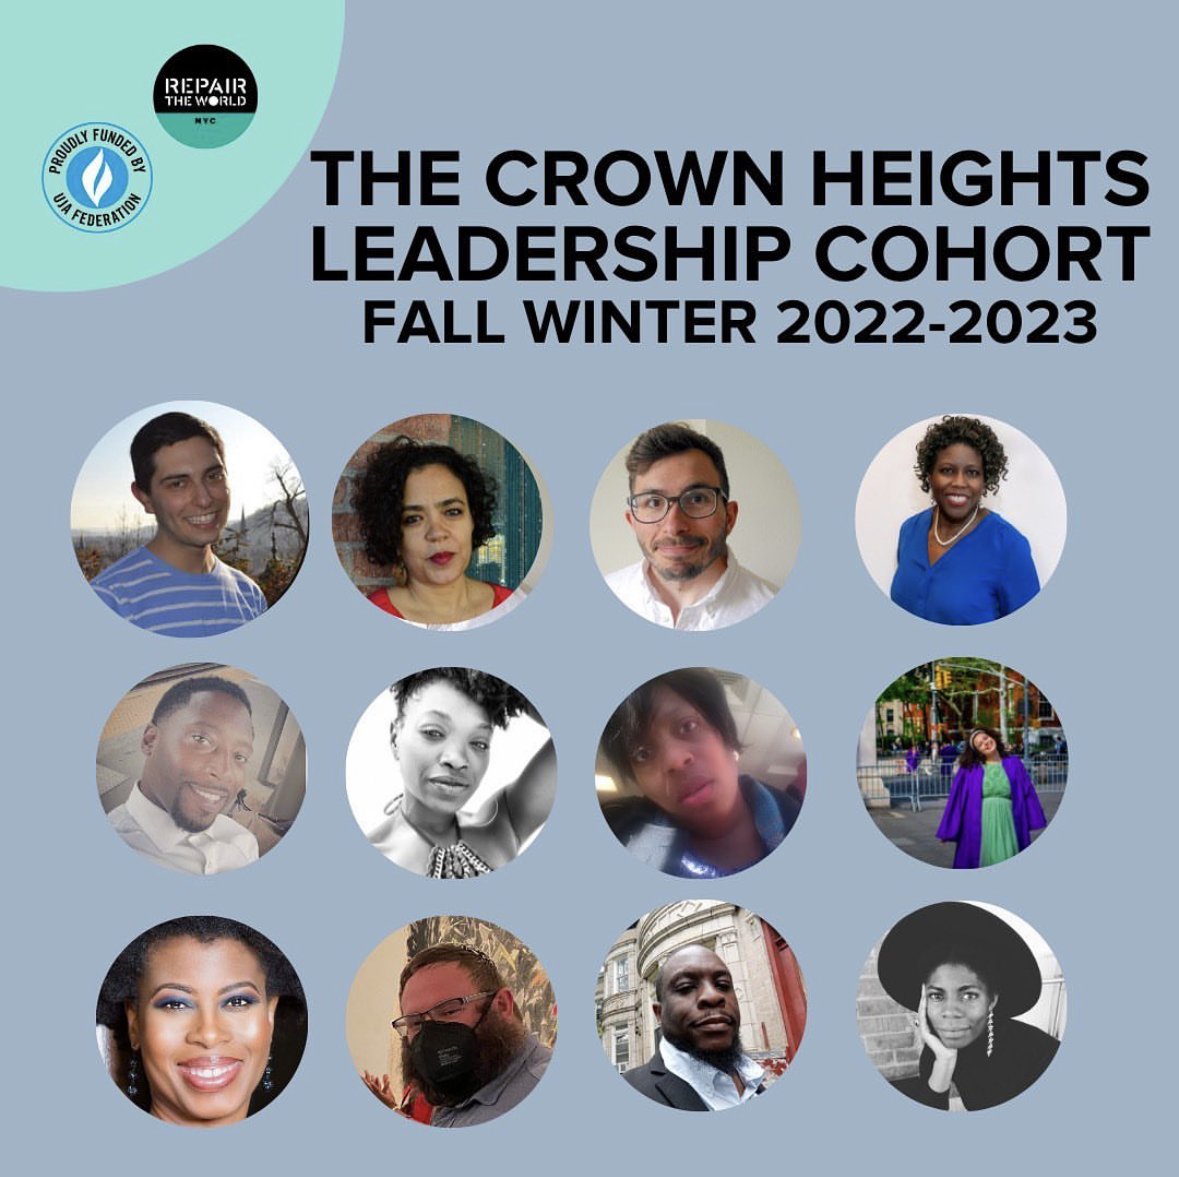 Congratulations to Laci Chisholm for being selected to the Crown Heights Leadership Cohort